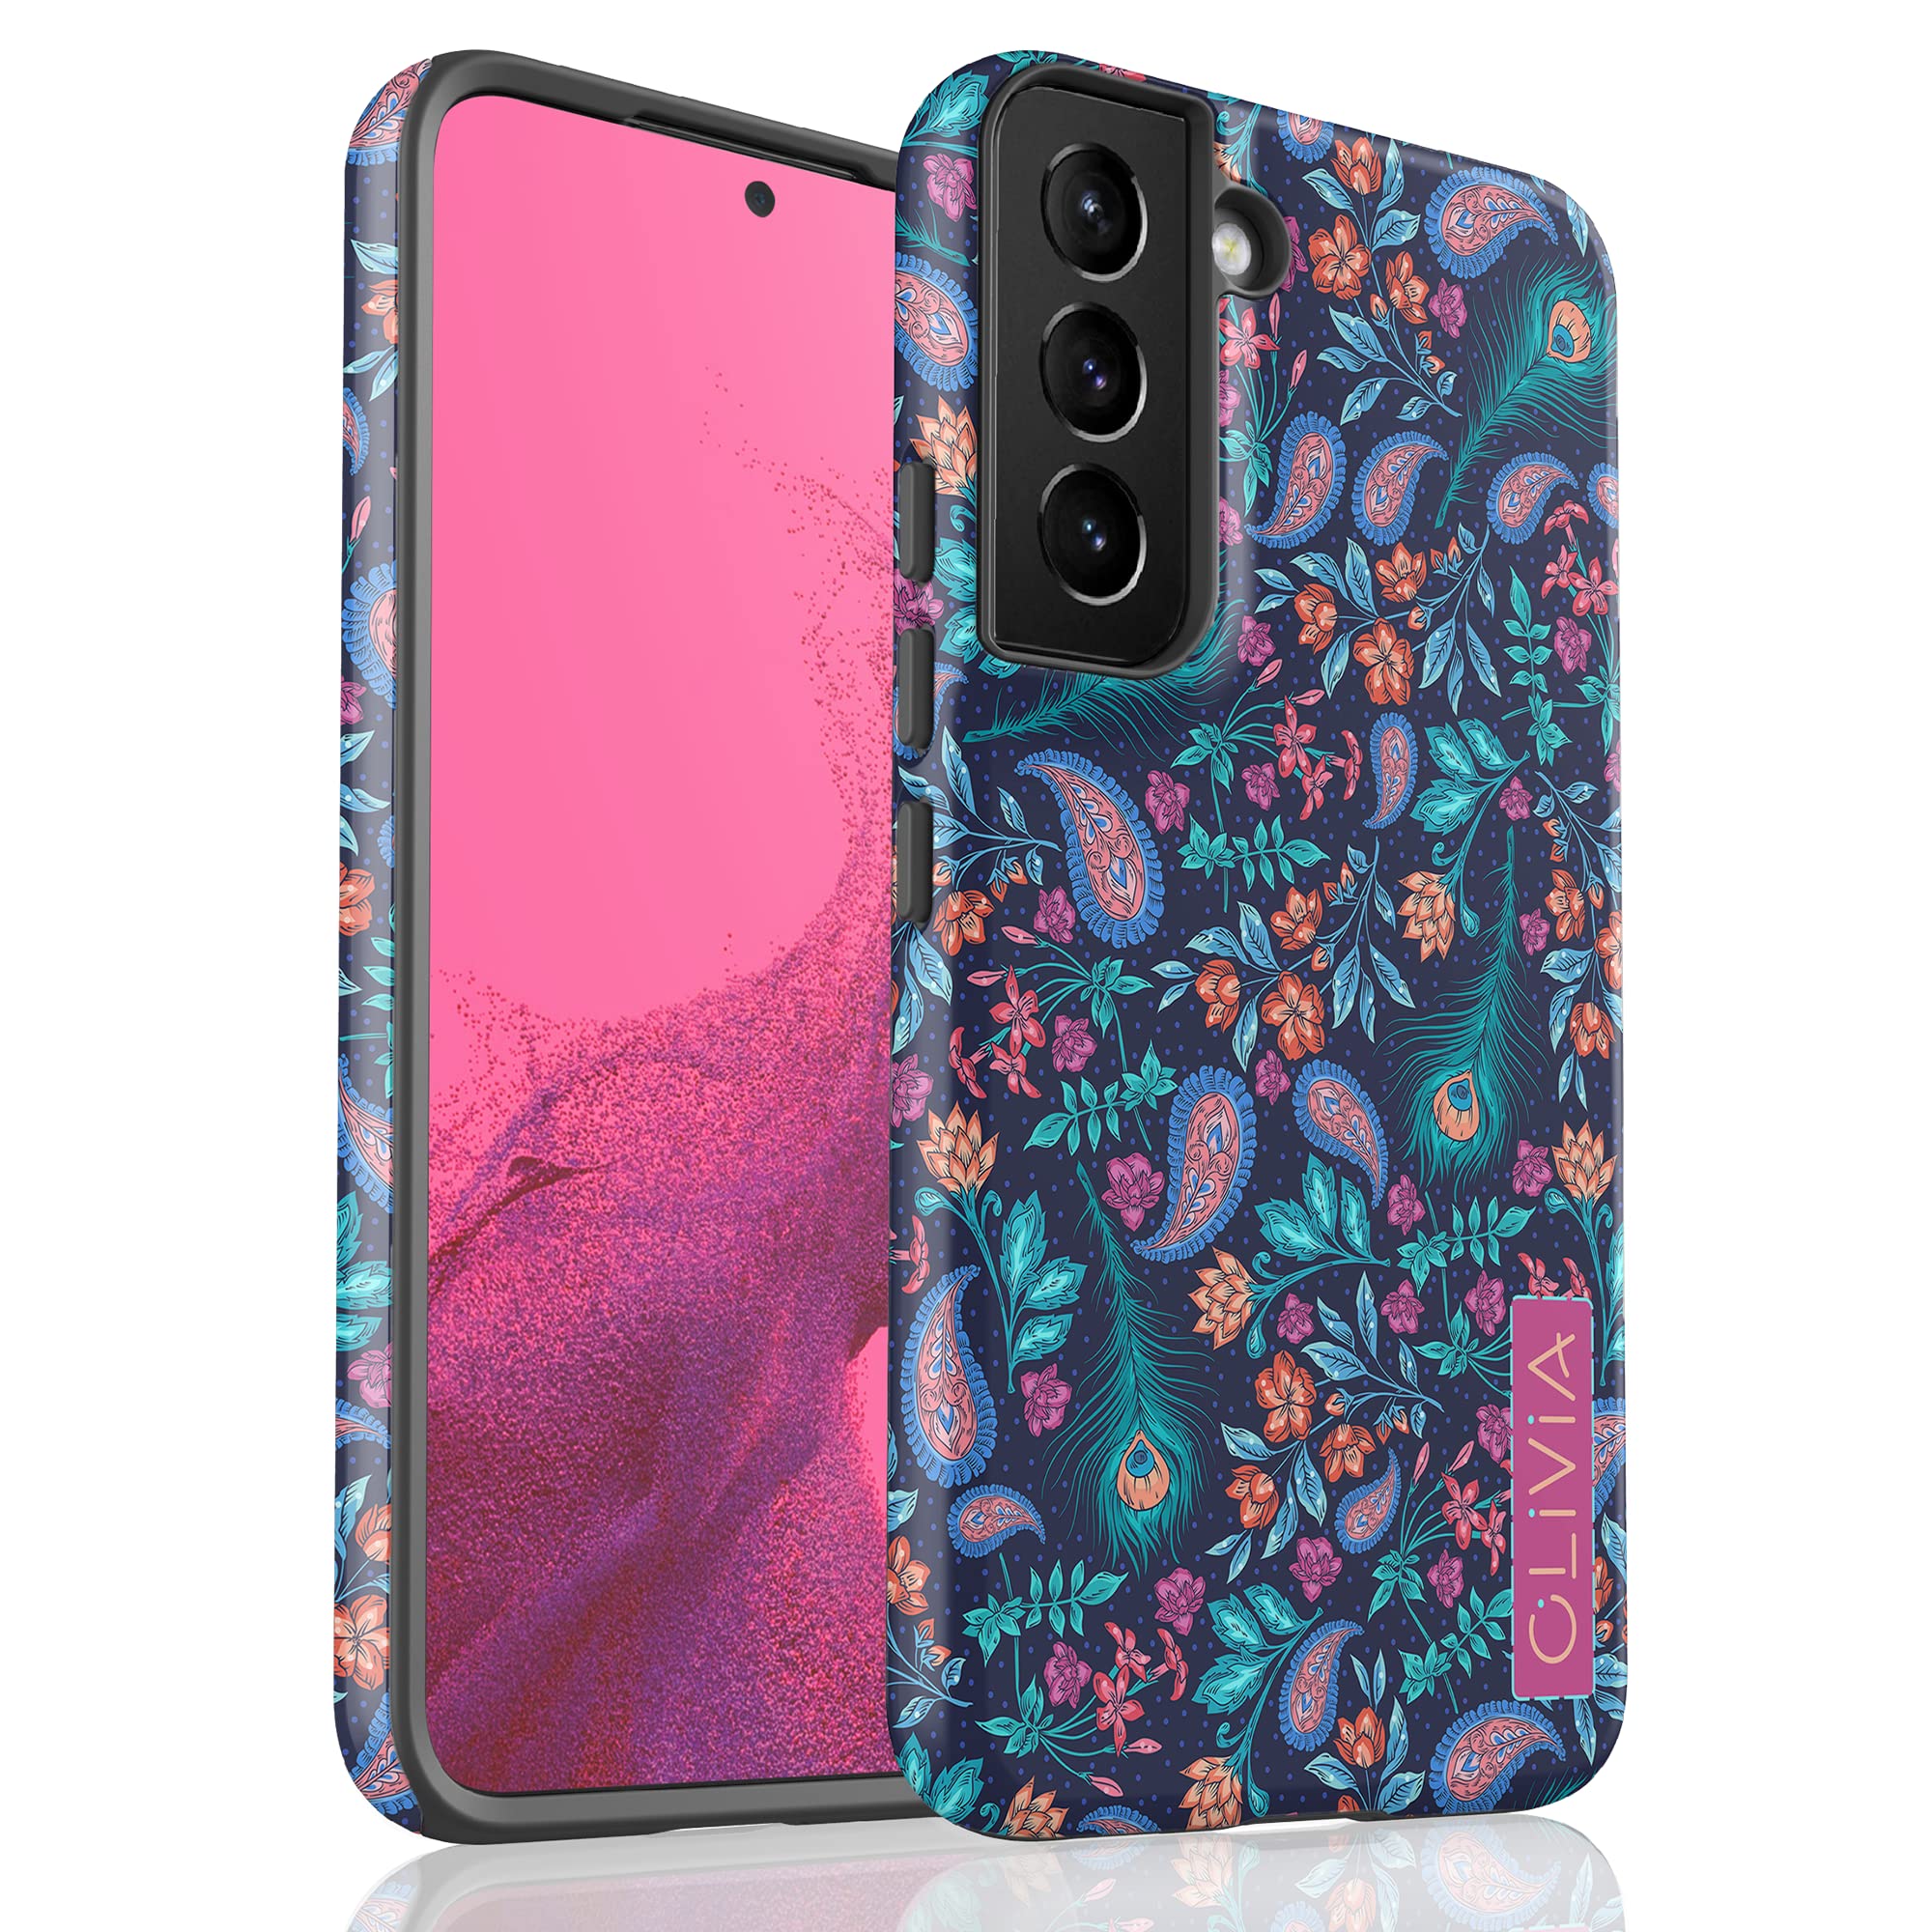 Artisticases Custom Paisley Floral Peacock Feathers Name Case, Personalized Case Designed for Samsung Galaxy S22 Plus, S21 Ultra, S20, S10e, S10, S9, S8, Note 20 Ultra, Note 10 Plus, Note 9, Note 8